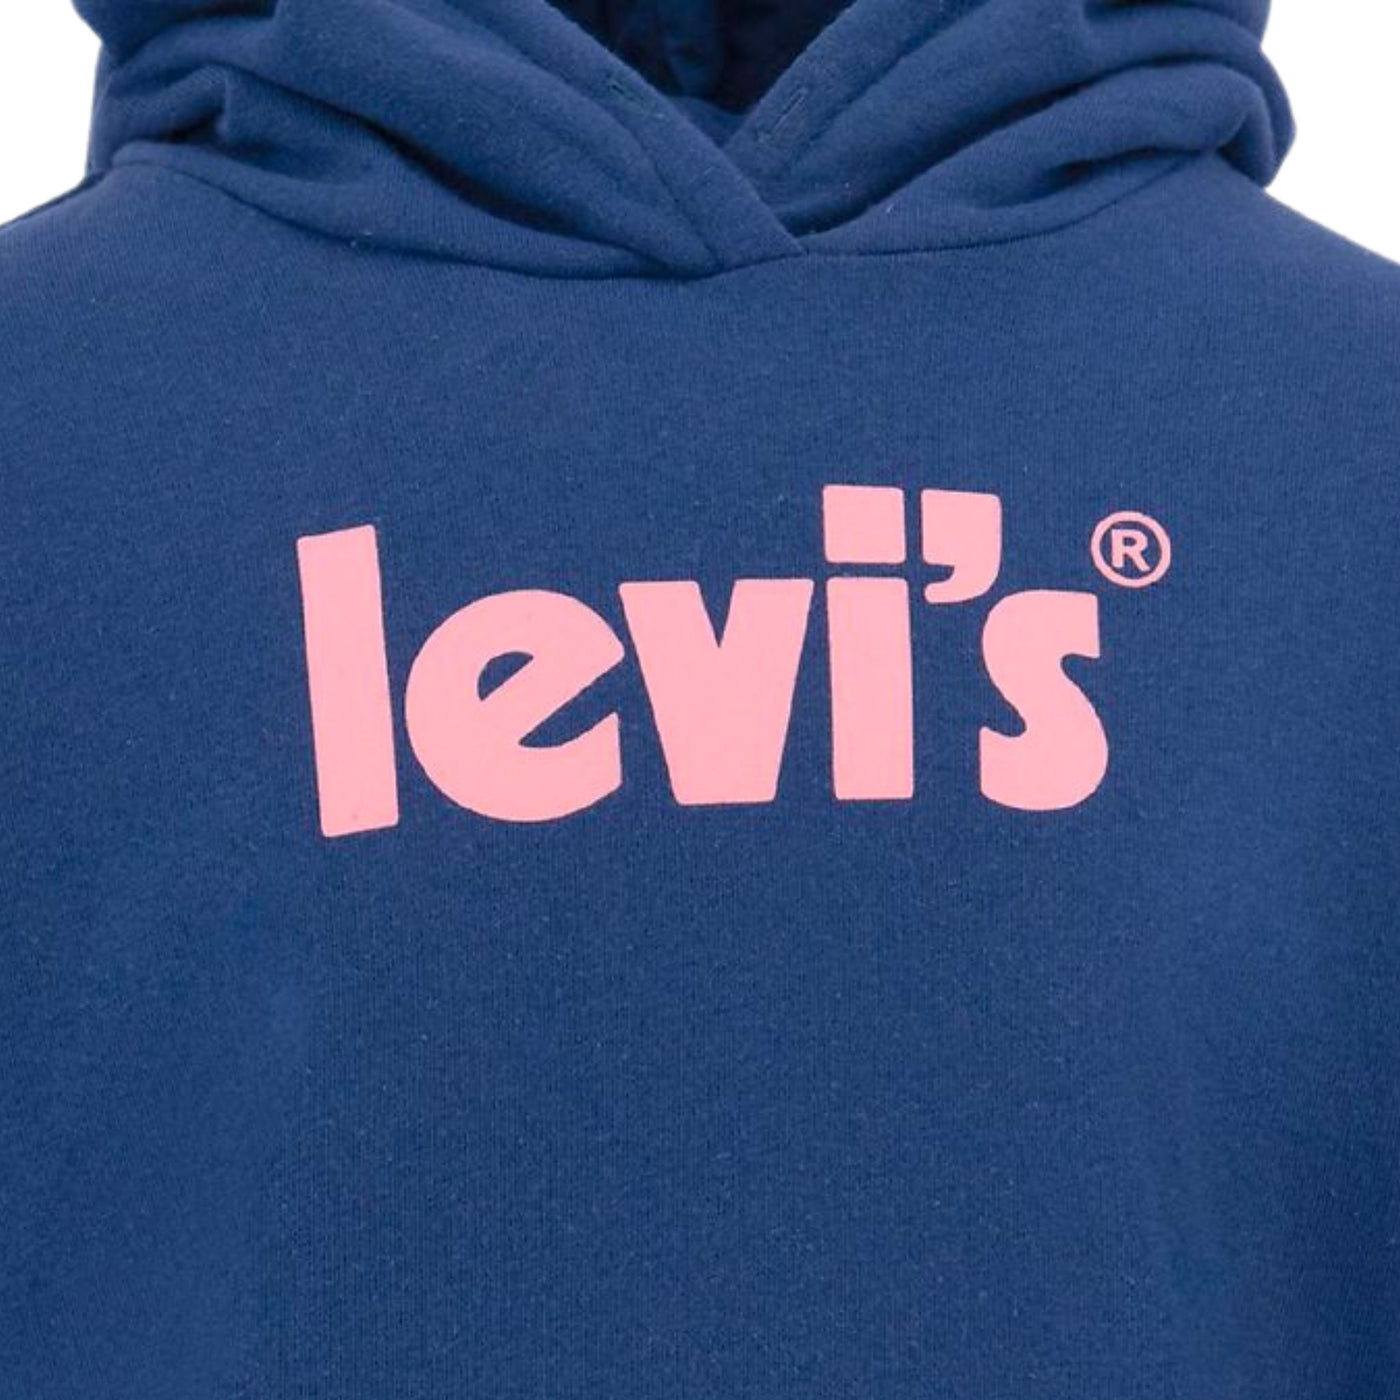 Girl's sweatshirt in solid color with logo